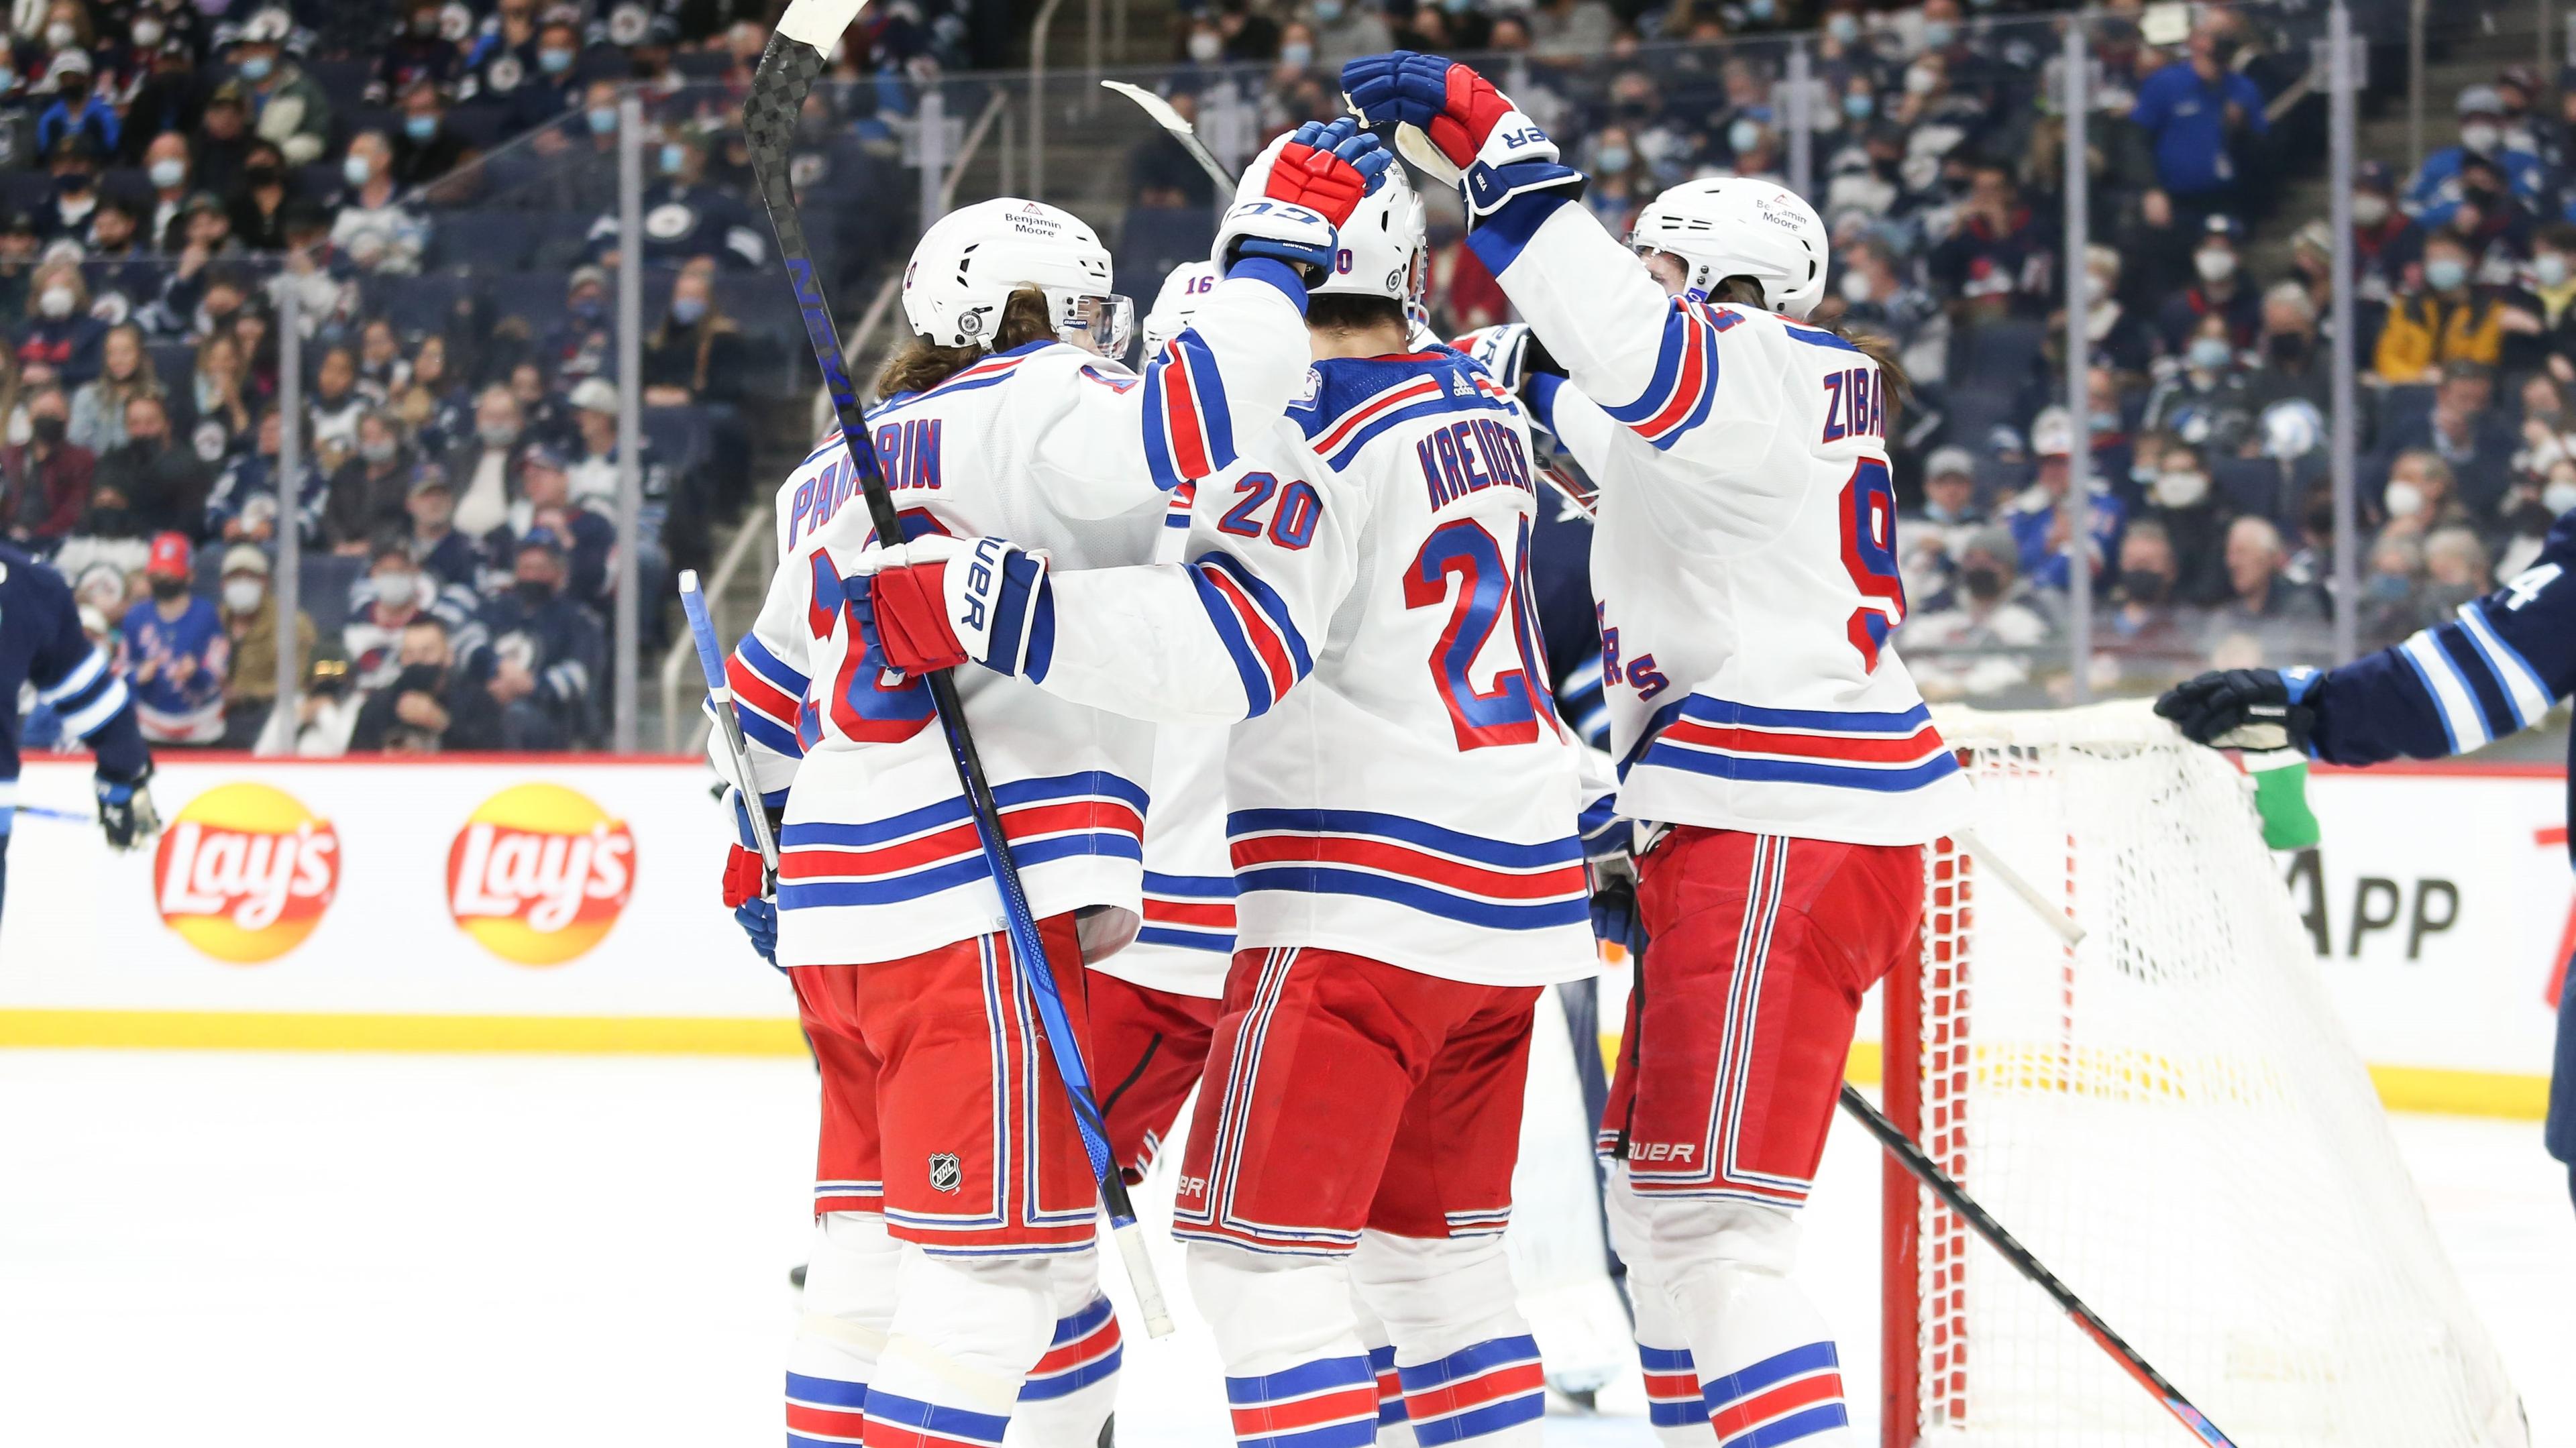 Mar 6, 2022; Winnipeg, Manitoba, CAN; New York Rangers forward Chris Kreider (20) is congratulated by his team mates after his goal against the Winnipeg Jets during the first period at Canada Life Centre. Mandatory Credit: Terrence Lee-USA TODAY Sports / Terrence Lee-USA TODAY Sports